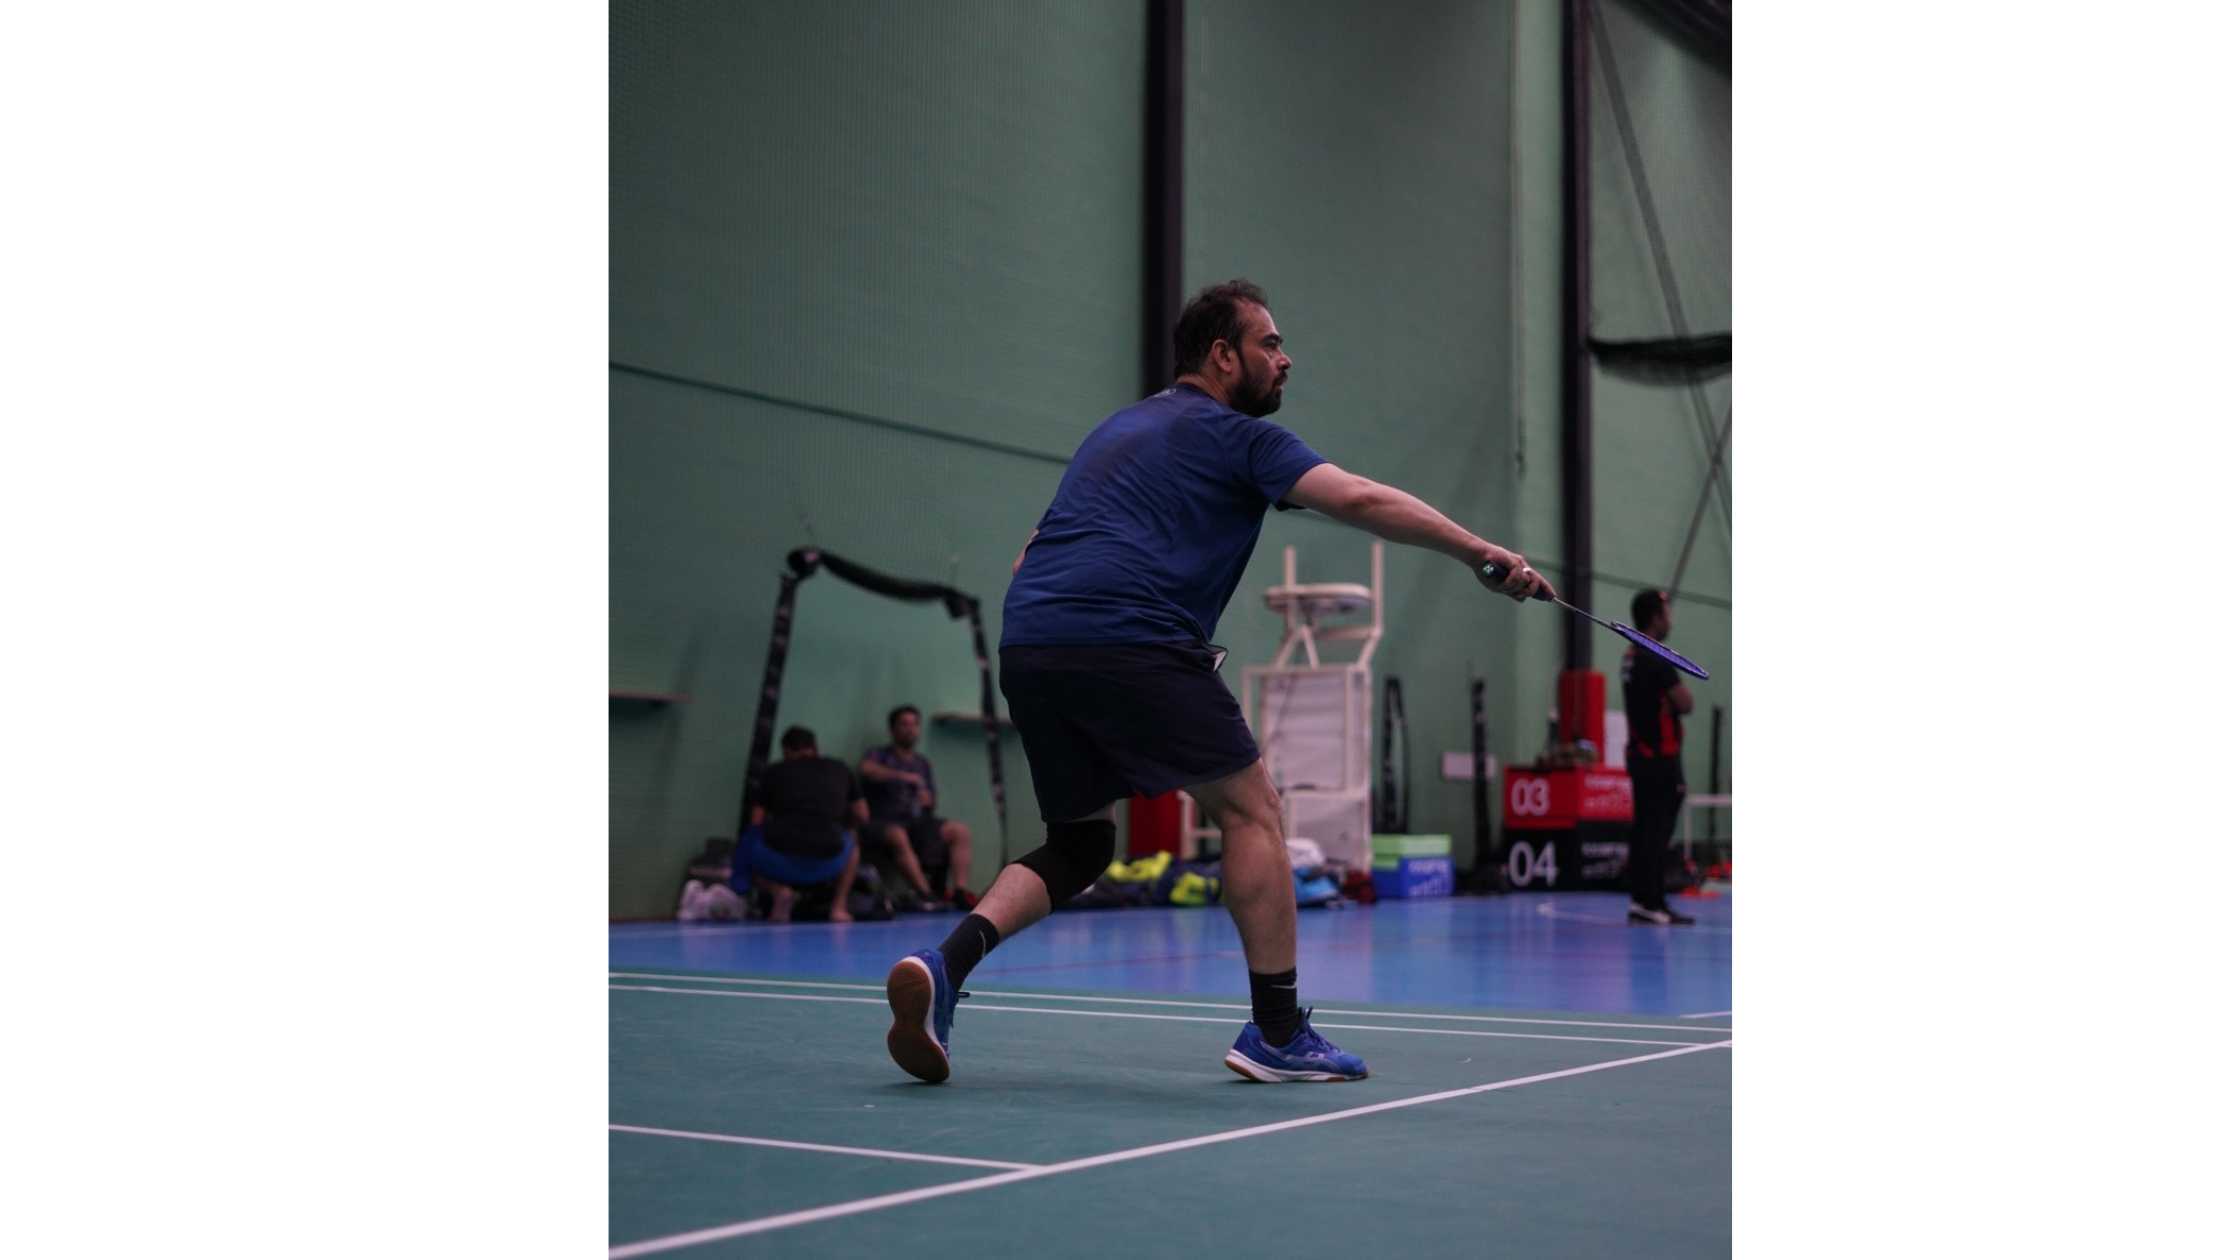 Essential Skills to Master in Badminton: Perspectives from Dubai Coaches: Write about crucial skills for badminton players as told by successful coaches in Dubai. 